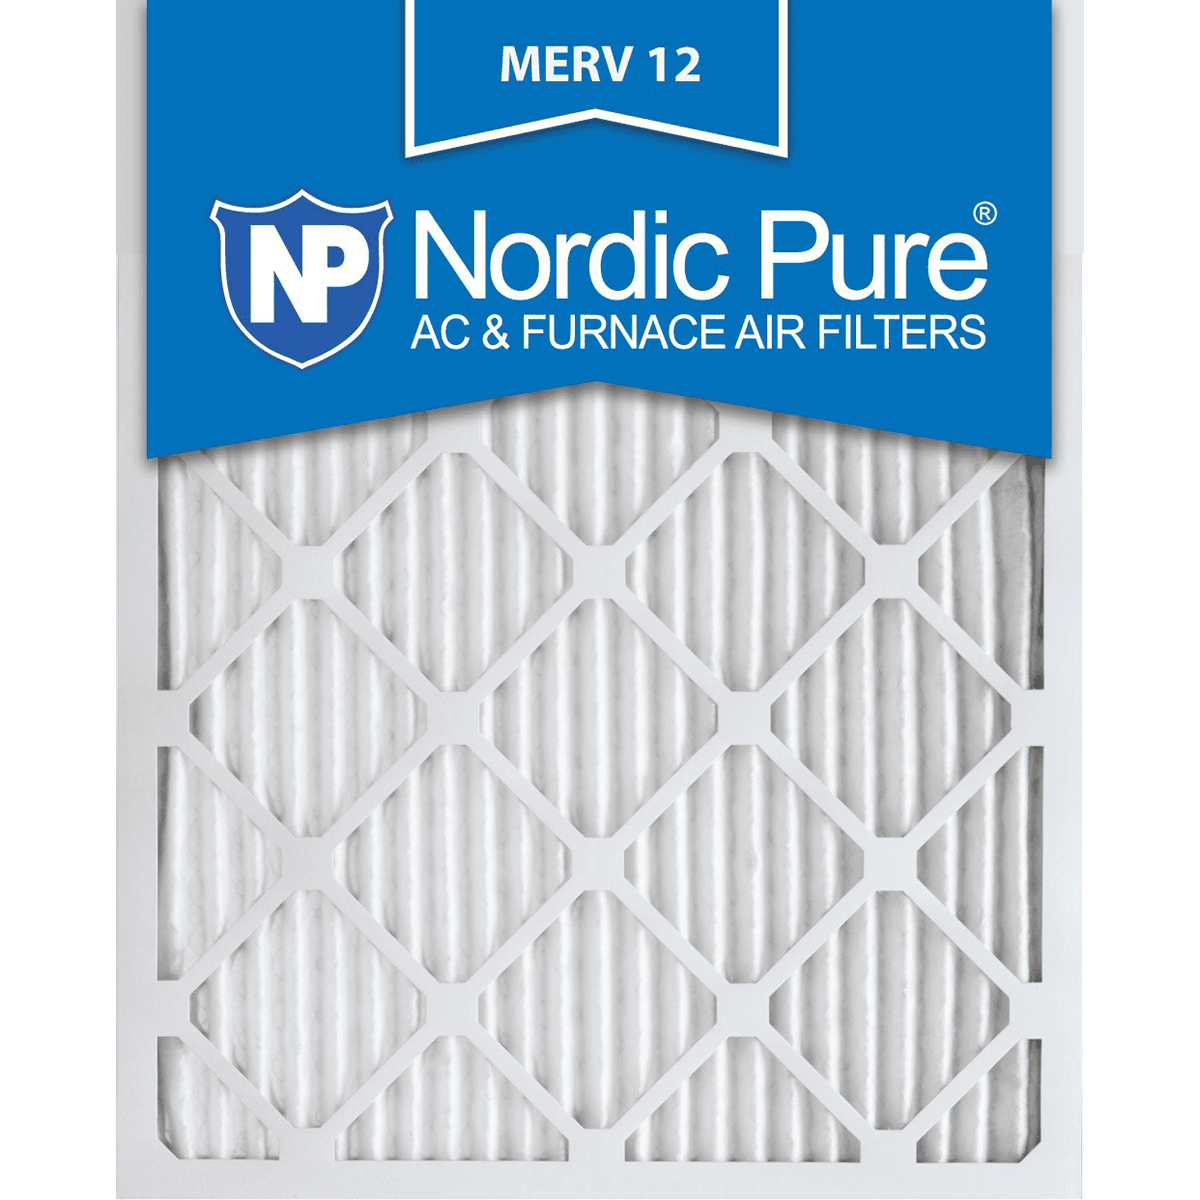 Nordic Pure Merv 12 Pleated Furnace Filter 16x20x1